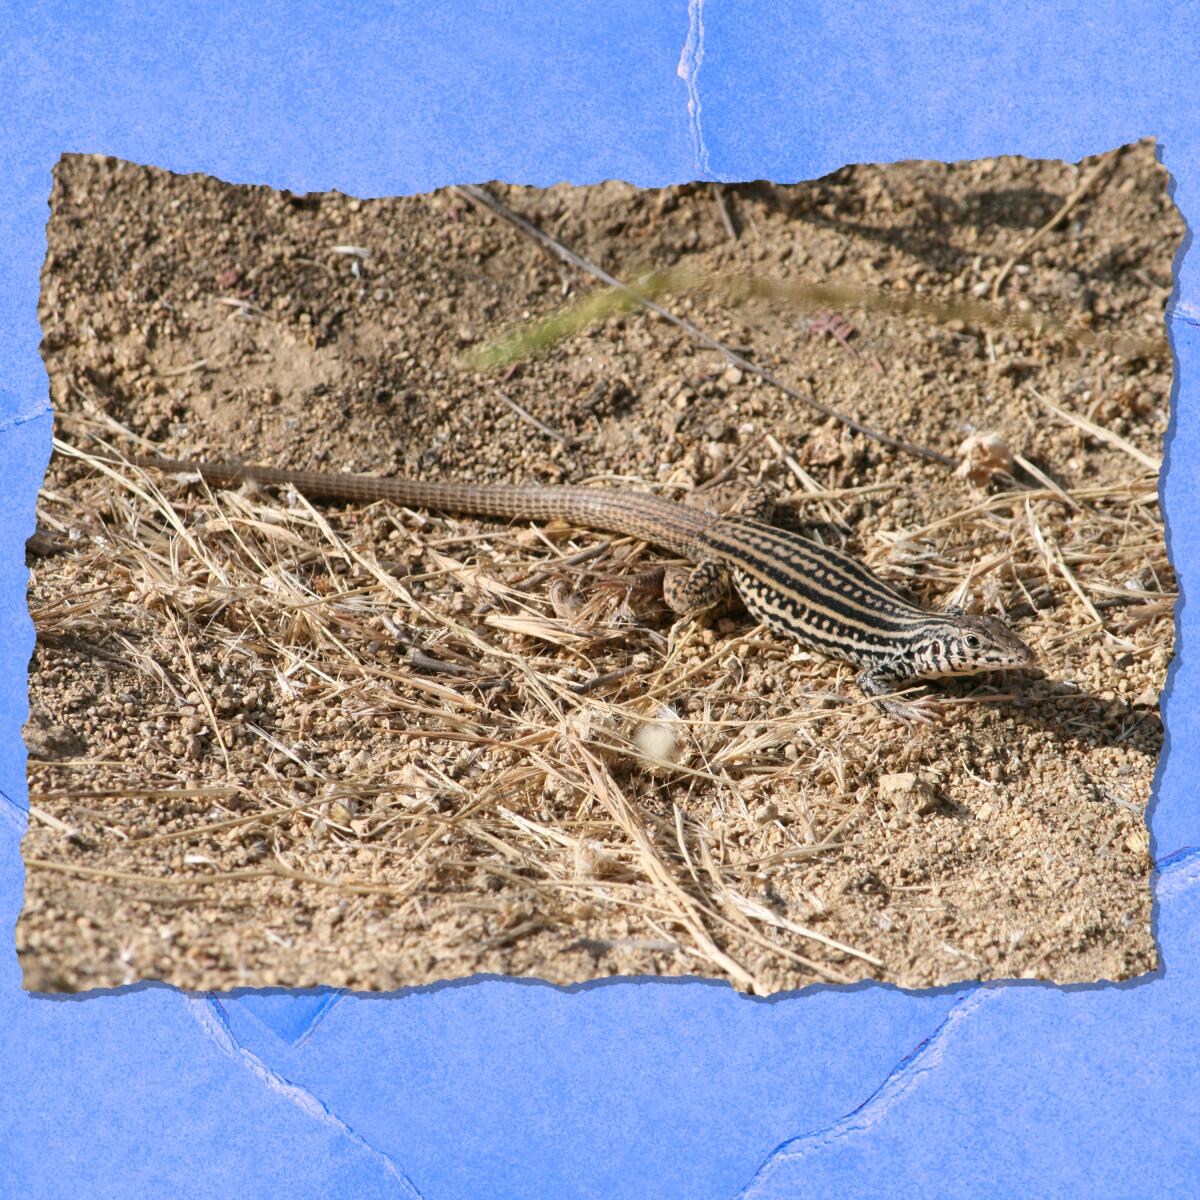 A whiptail lizard in Griffith Park.